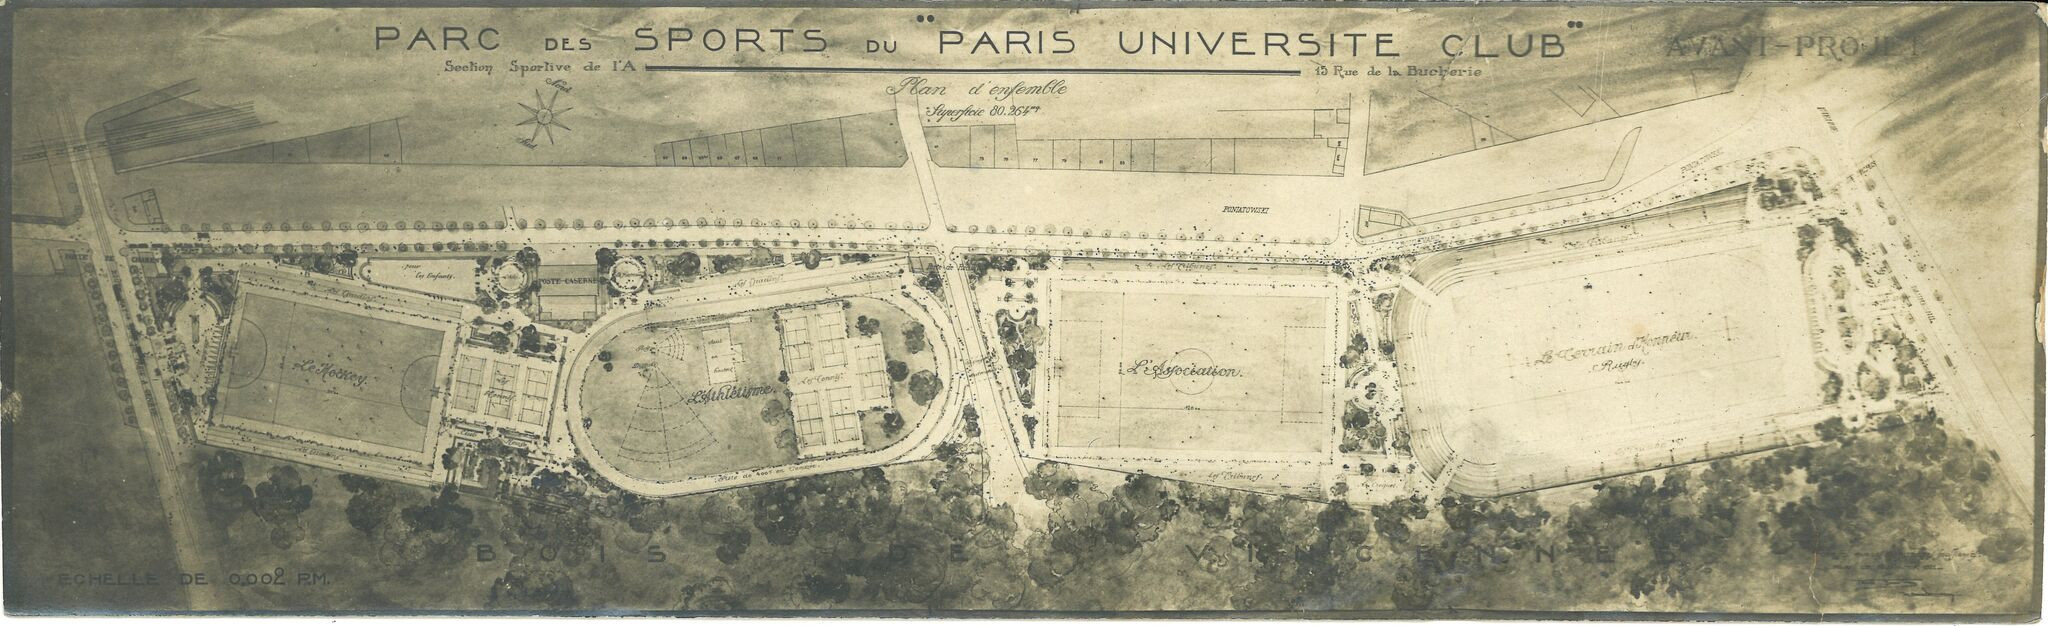 The plan for the Parc des Sports de Paris Université Club, which hosted the first World University Games in May 1923 ©FISU